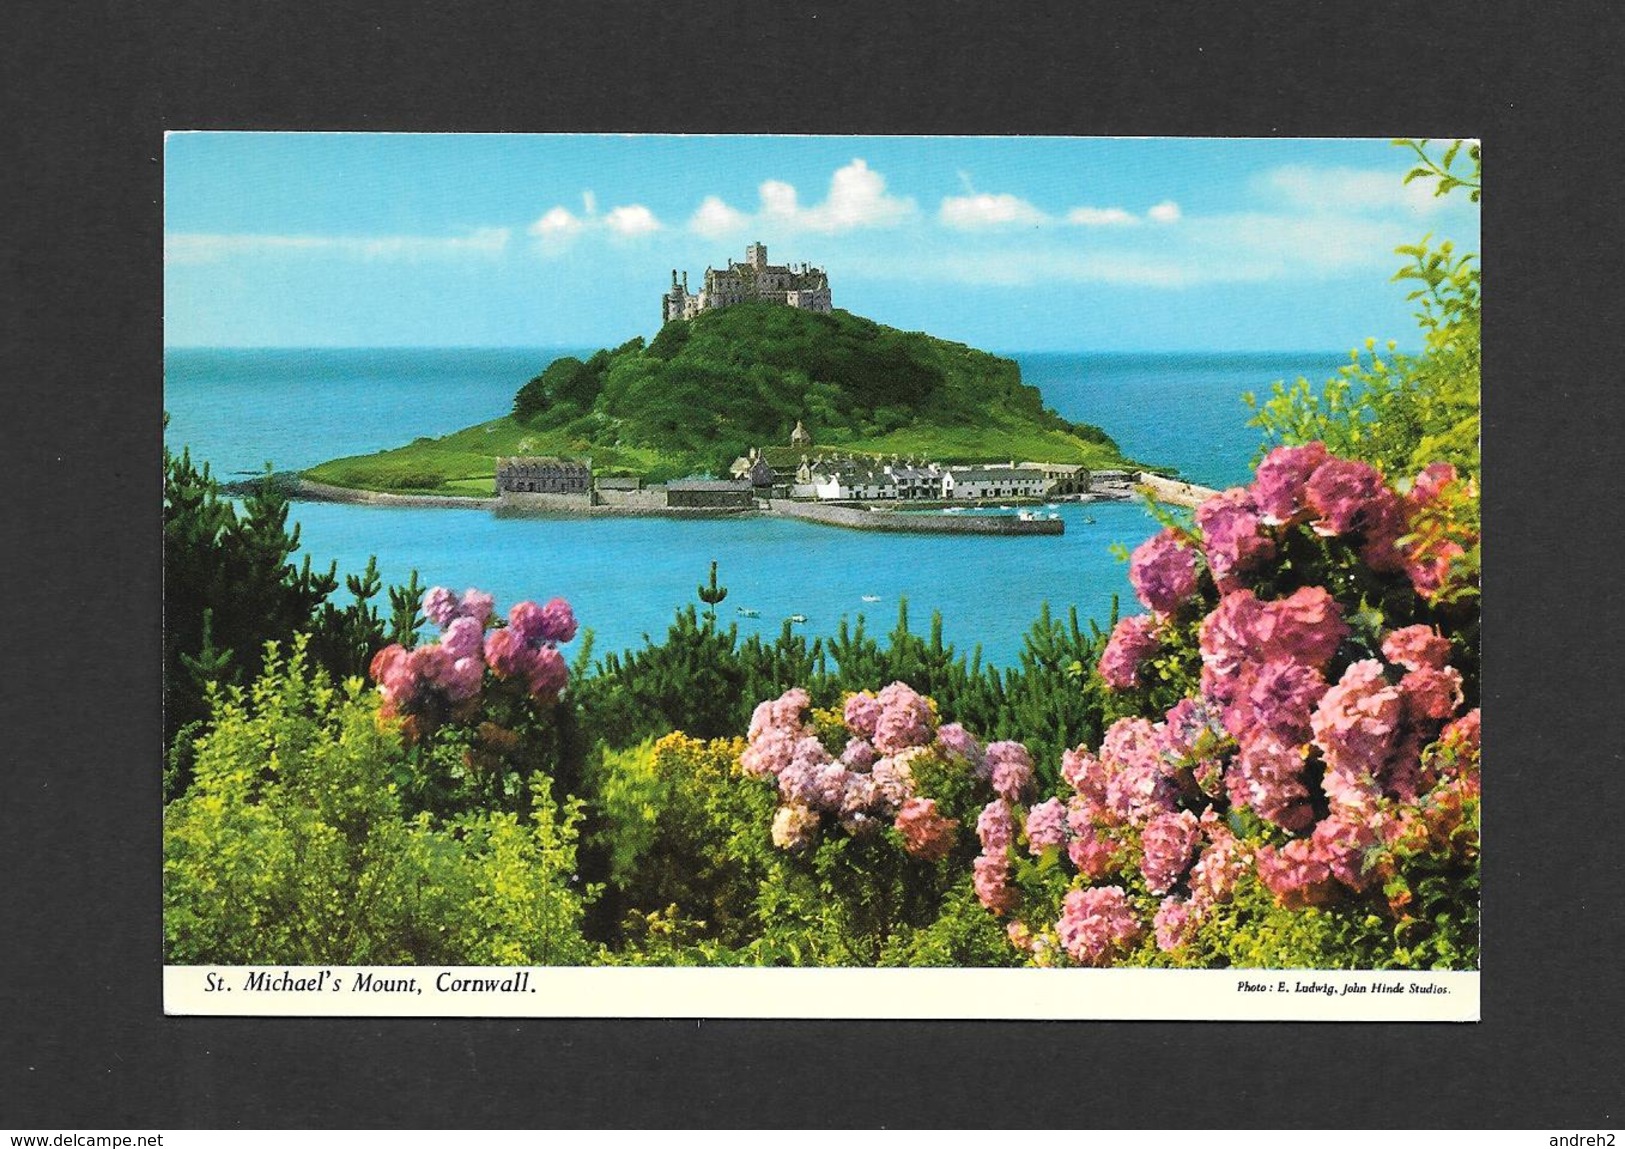 CORNWALL - ANGLETERRE - ST MICHAEL'S MOUNT - PHOTO E LUDWIG BY JOHN HINDE STUDIO - Land's End